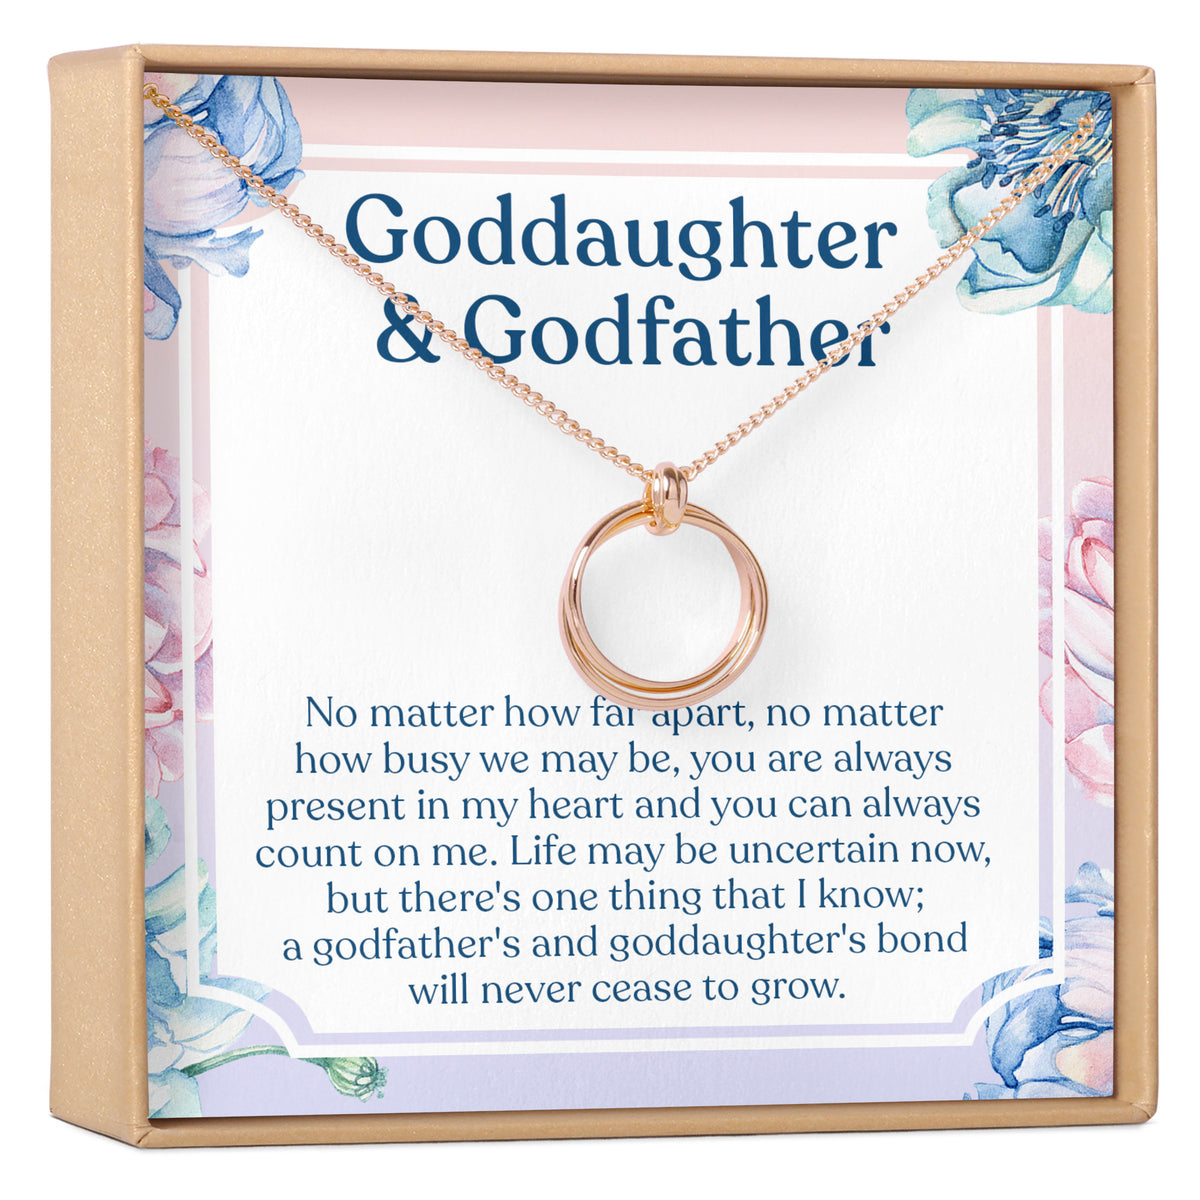 Goddaughter &amp; Godfather Necklace, Multiple Styles Necklace